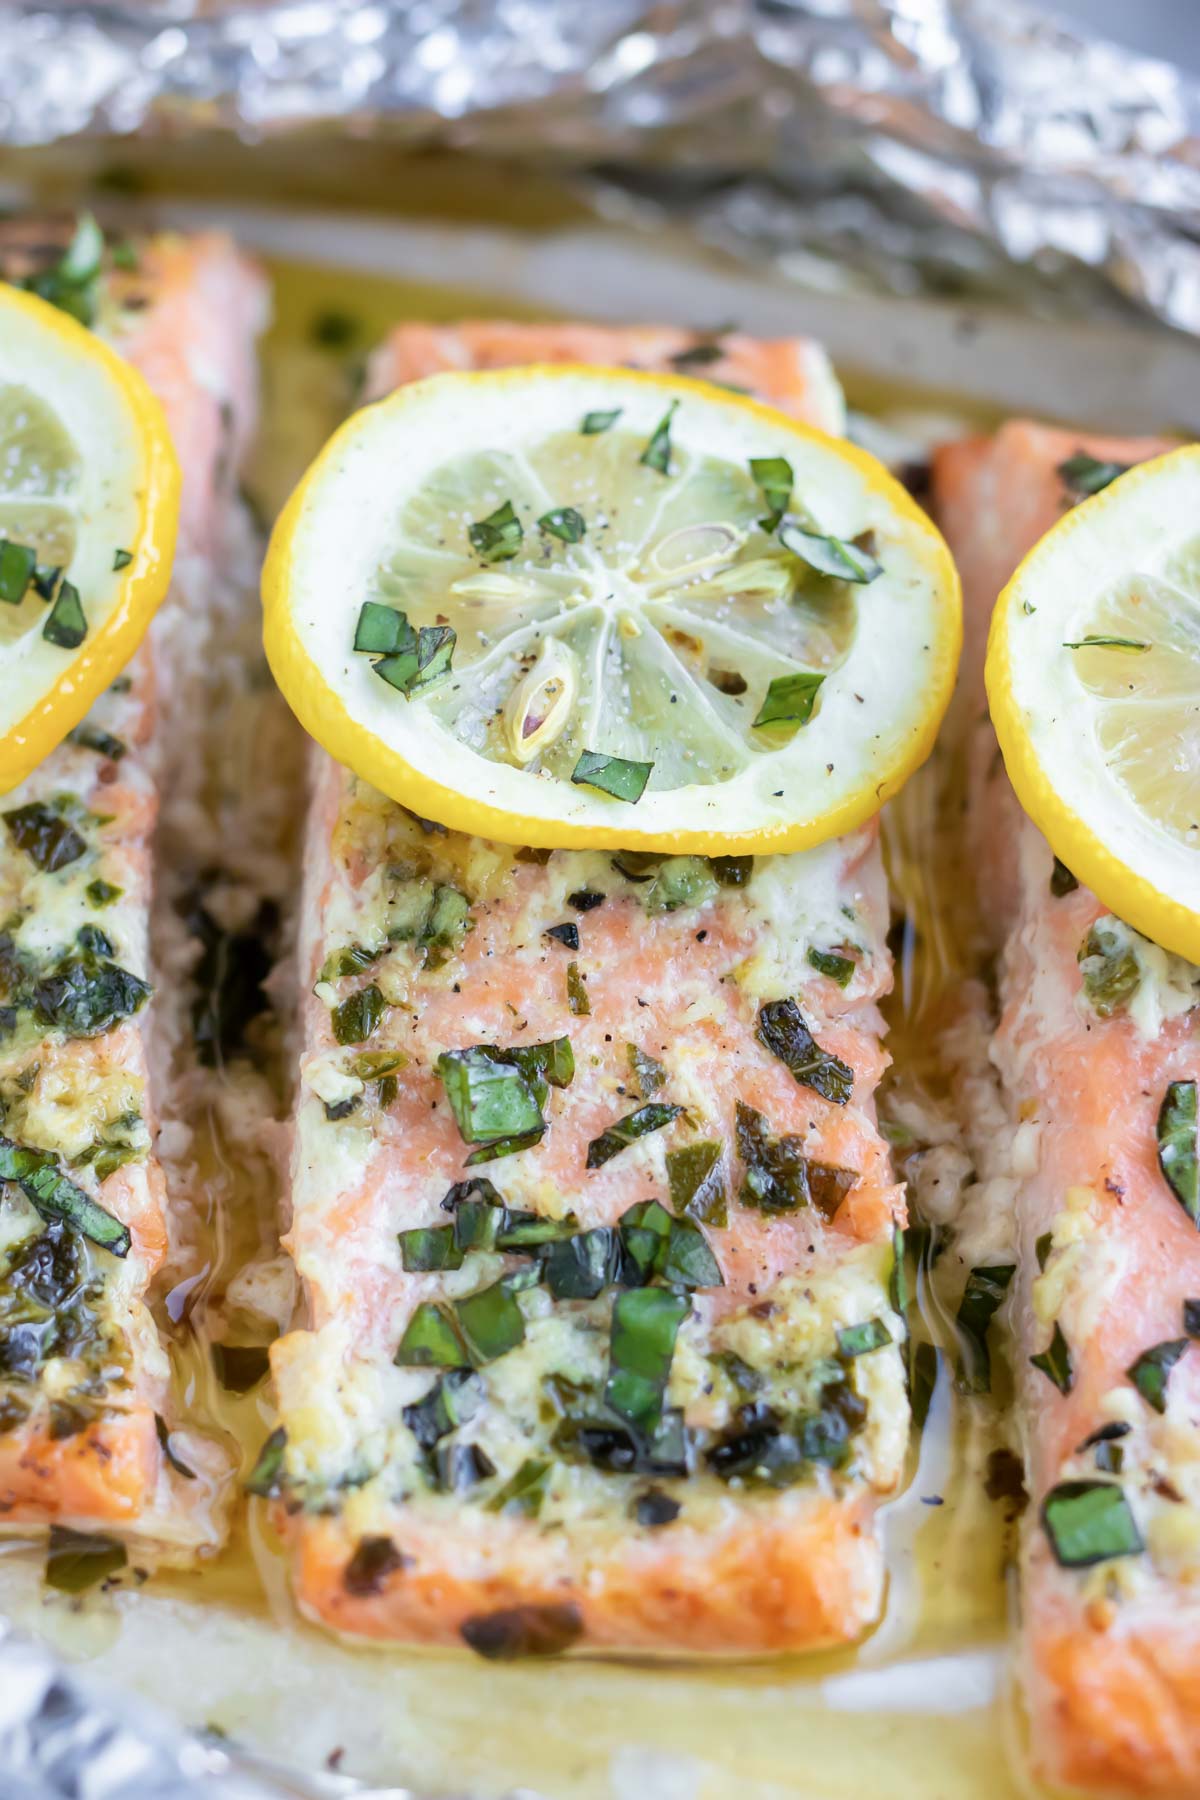 A fillet of fish with chopped fresh basil and lemon slices.